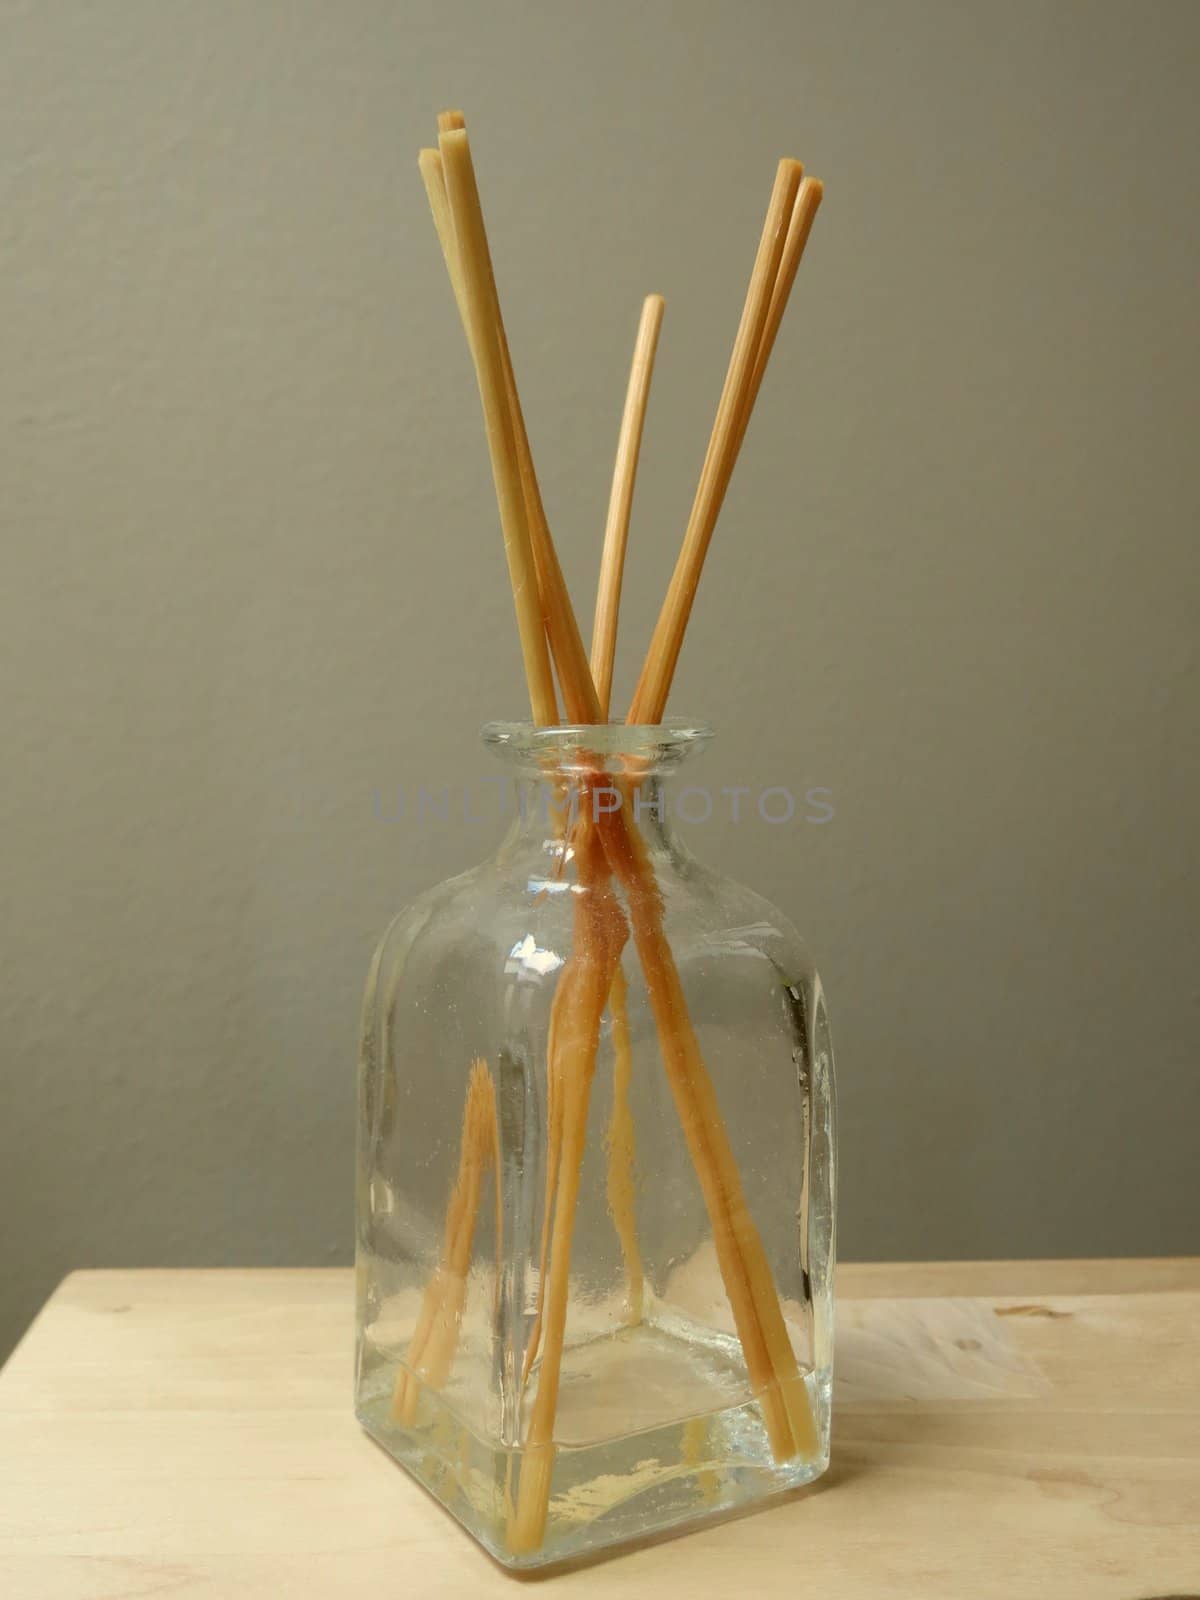 fragrance diffuser with home scent and cedar wood reeds